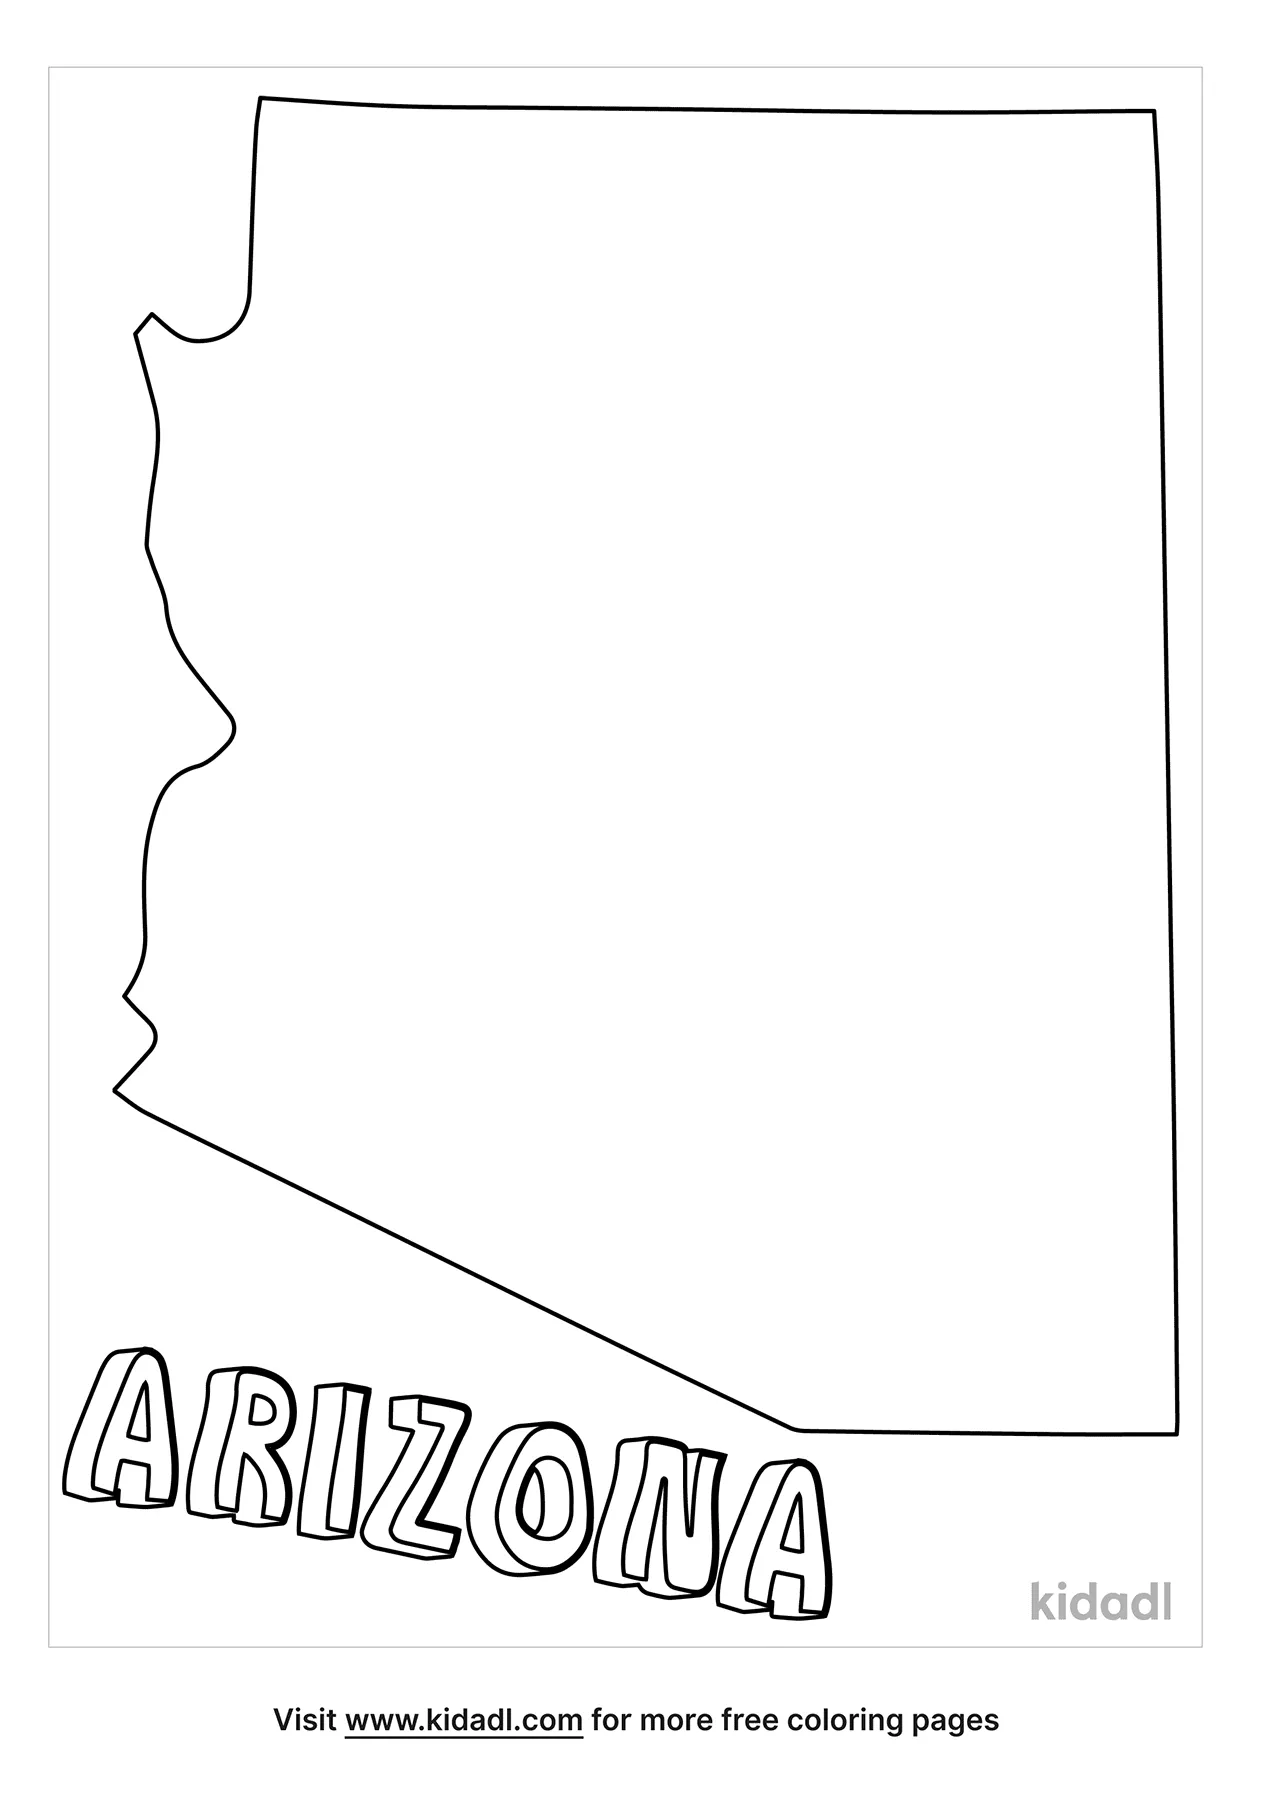 coloring pages of the state map